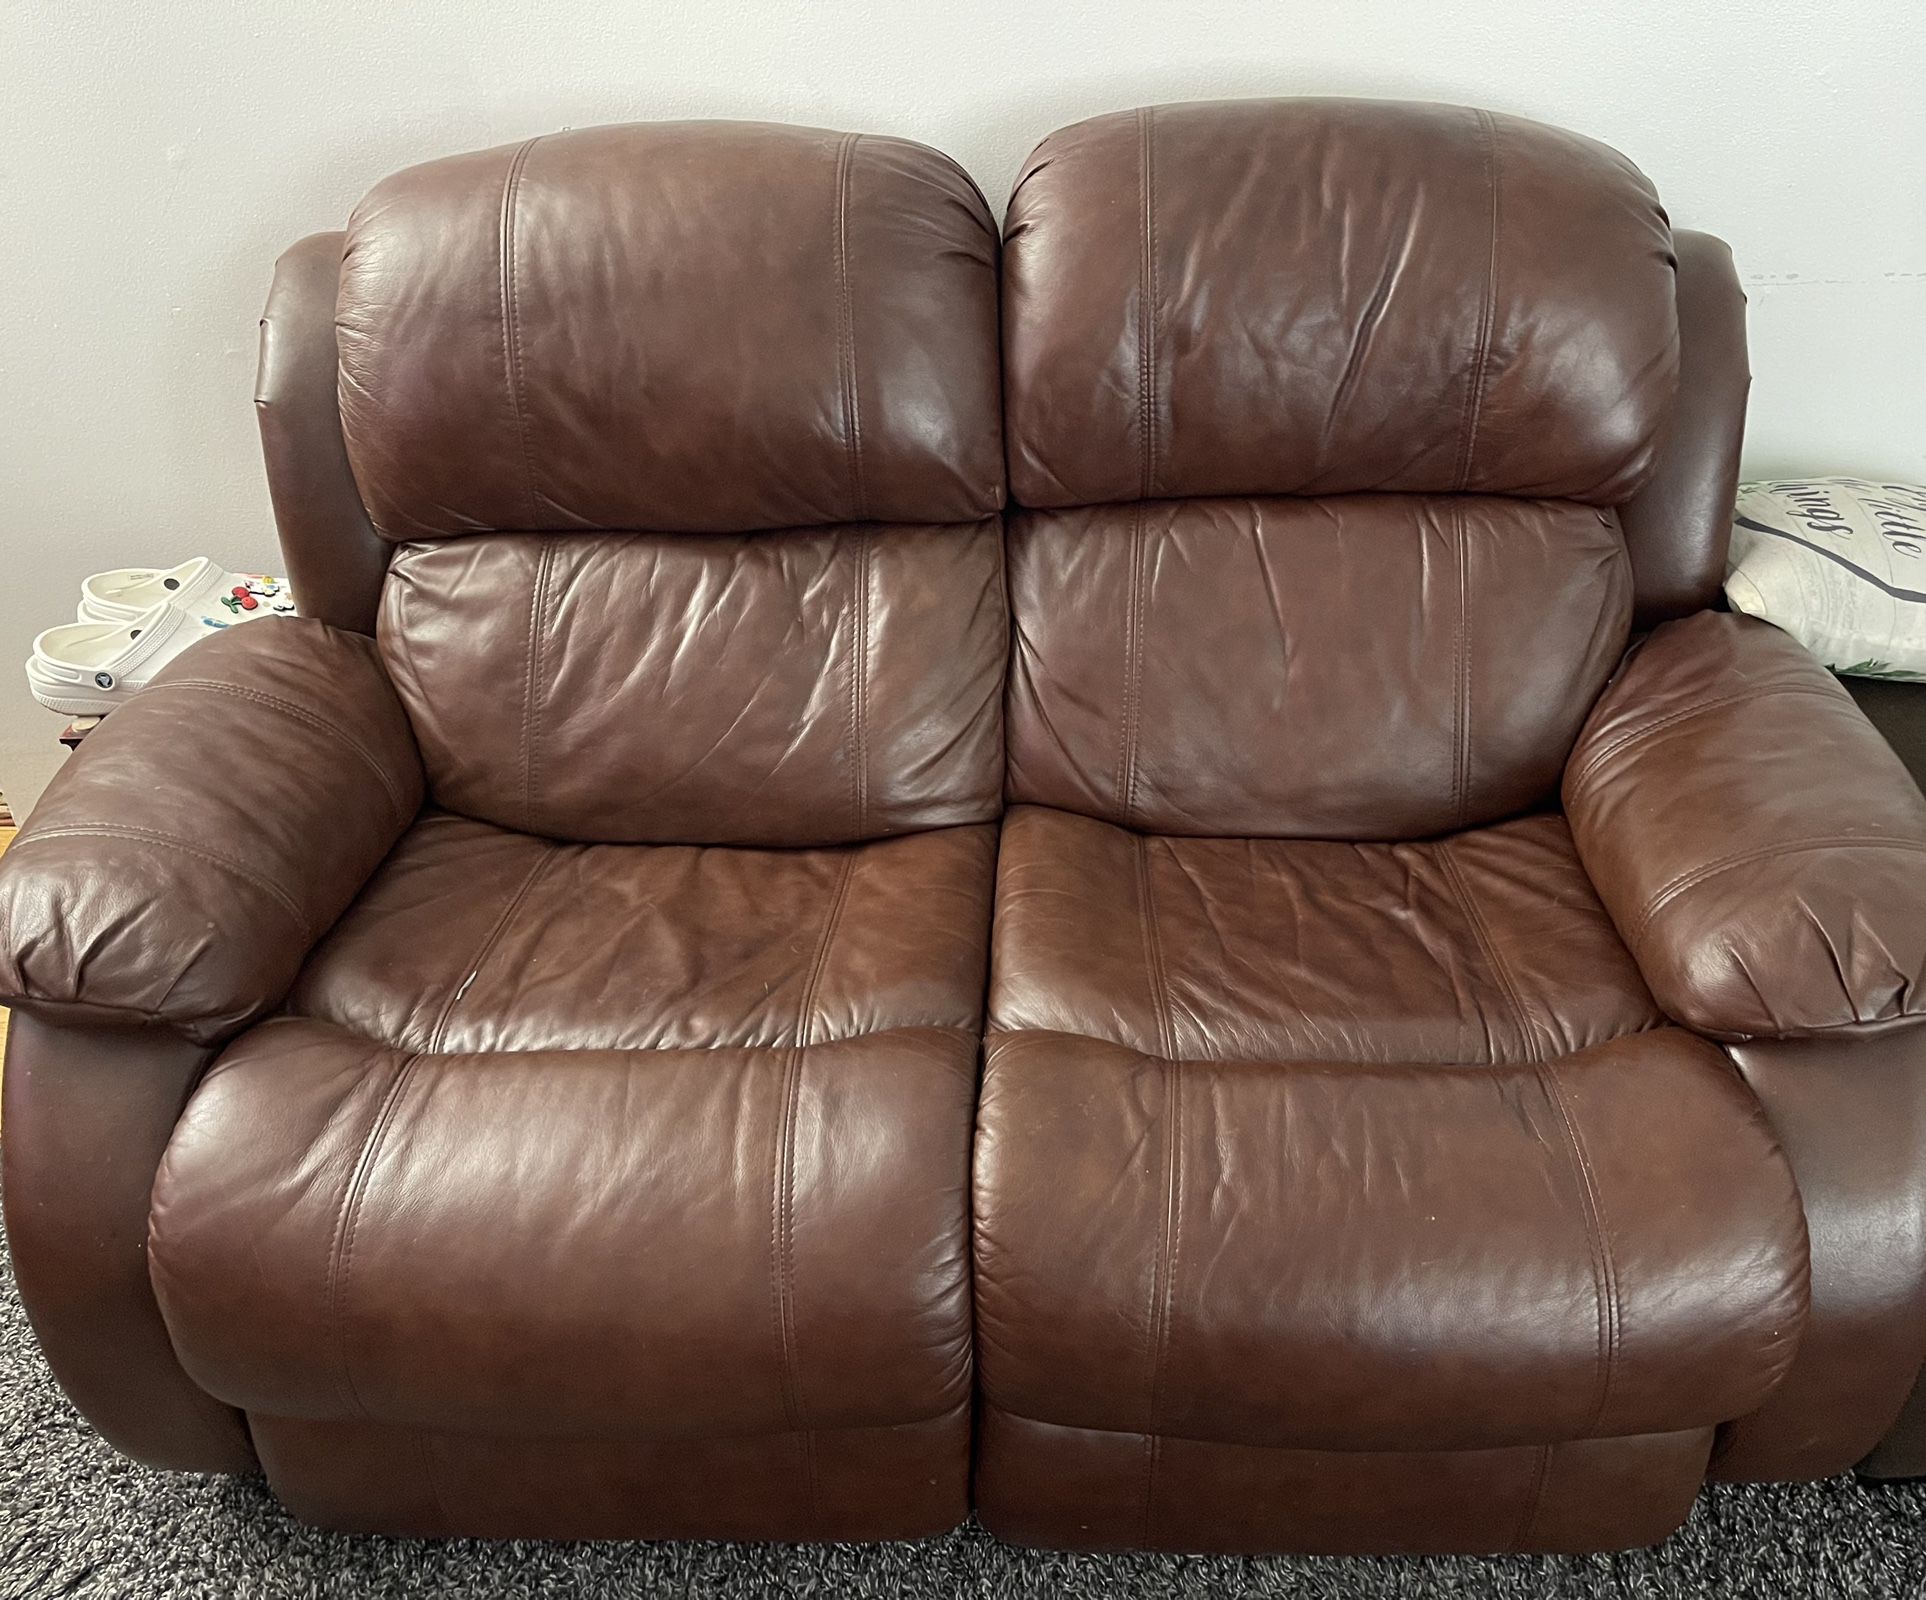 2 Leather Recliners $225.00 Each of OBO .